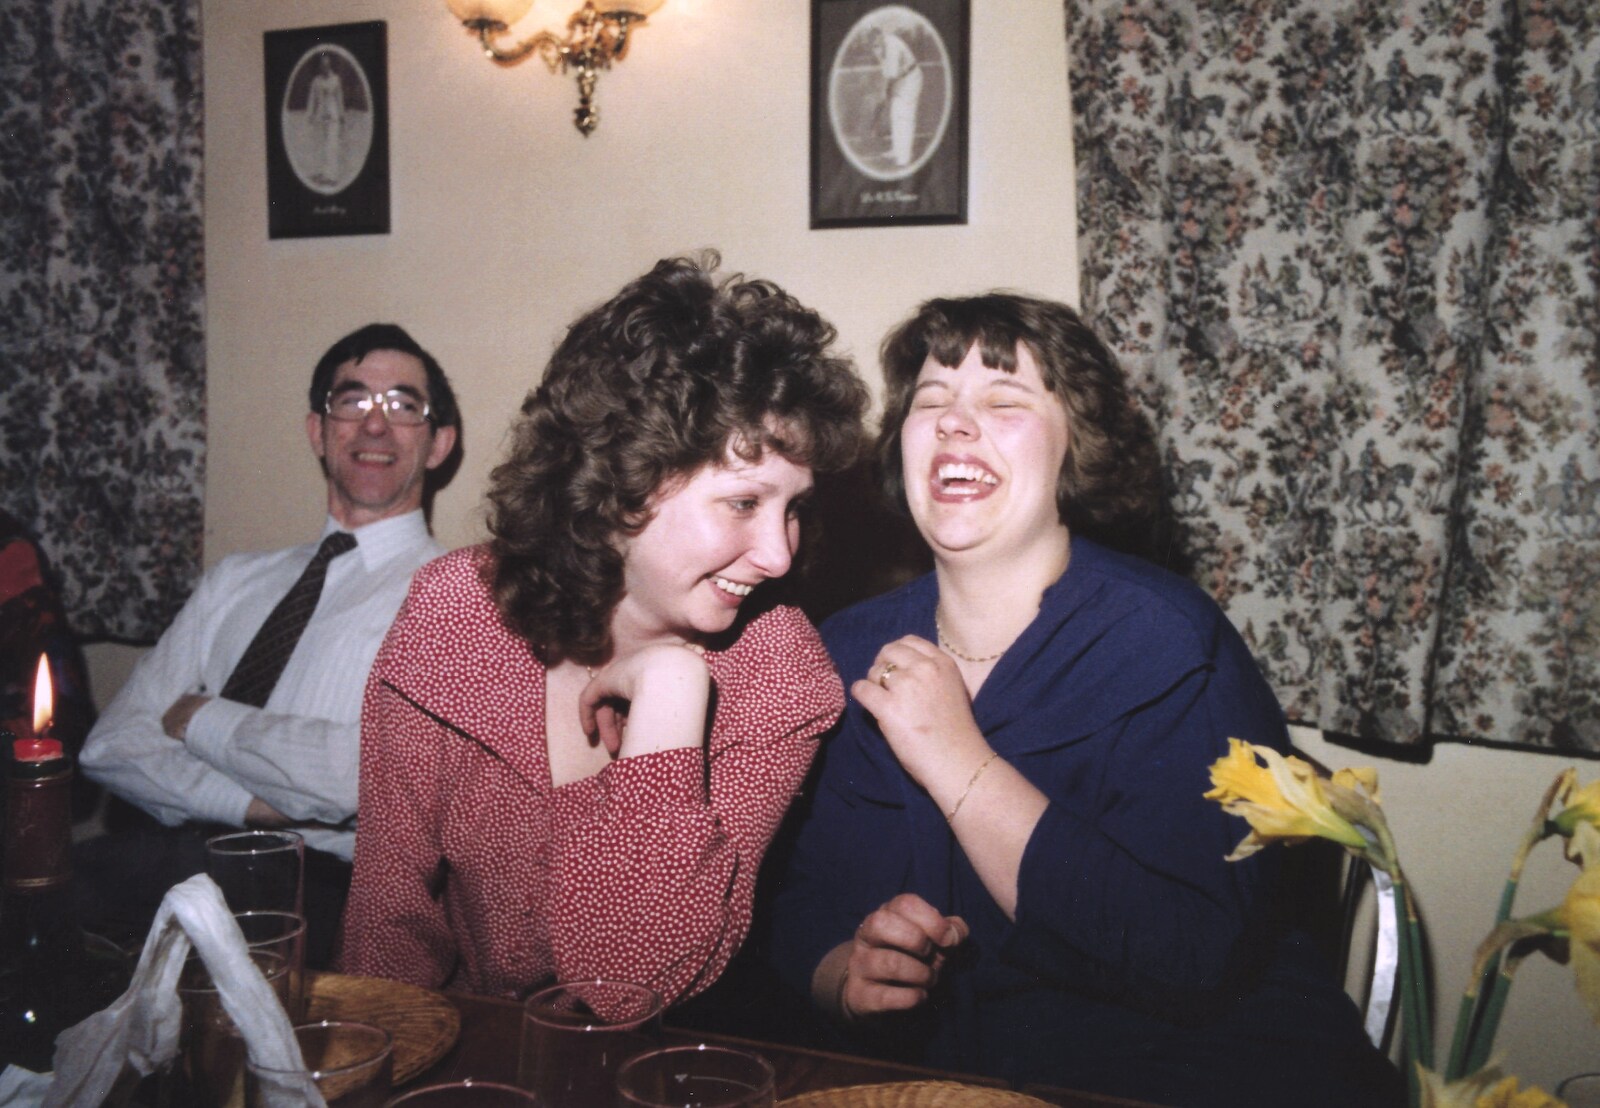 BPCC Printec Reunion at The Brome Swan, Suffolk - 20th February 1991: Alison and Wendy share a joke, as Adrian looks on